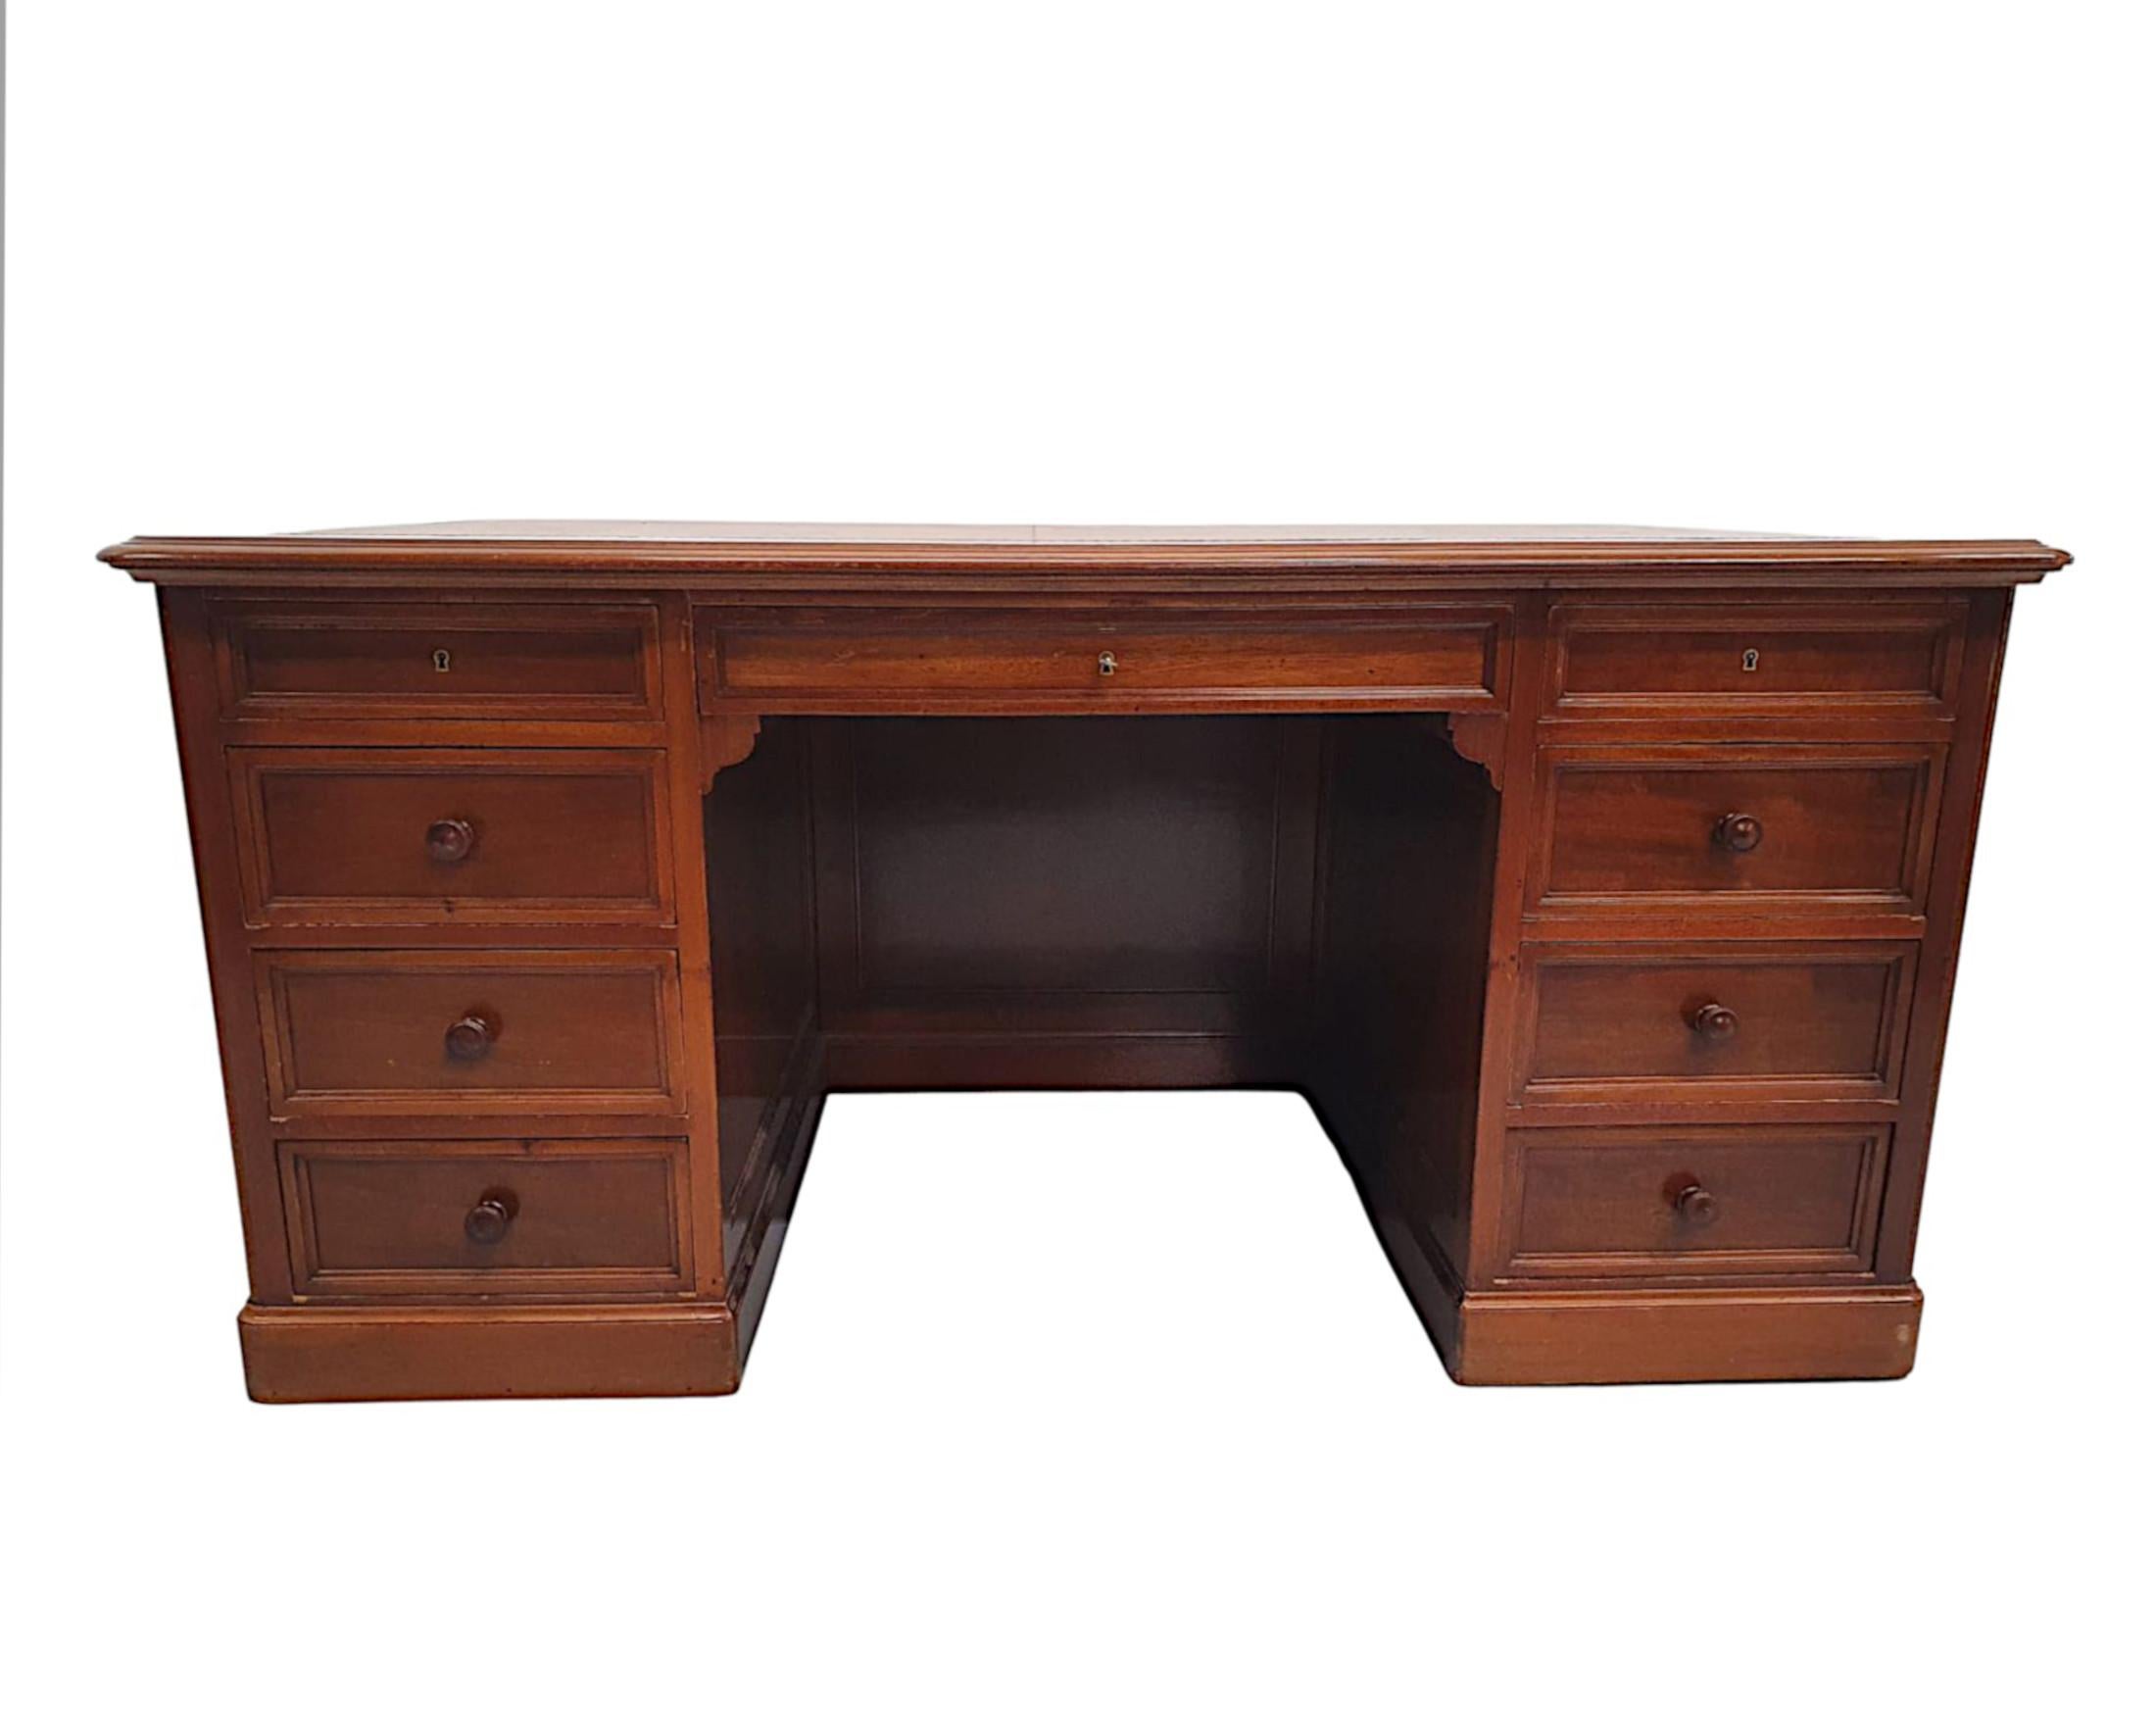 A very fine 19th century mahogany nine drawer pedestal desk, finely hand carved, of fabulous quality and in excellent condition with rich patination and grain. The moulded top of rectangular form is fitted with a gorgeous red gilt embossed tooled